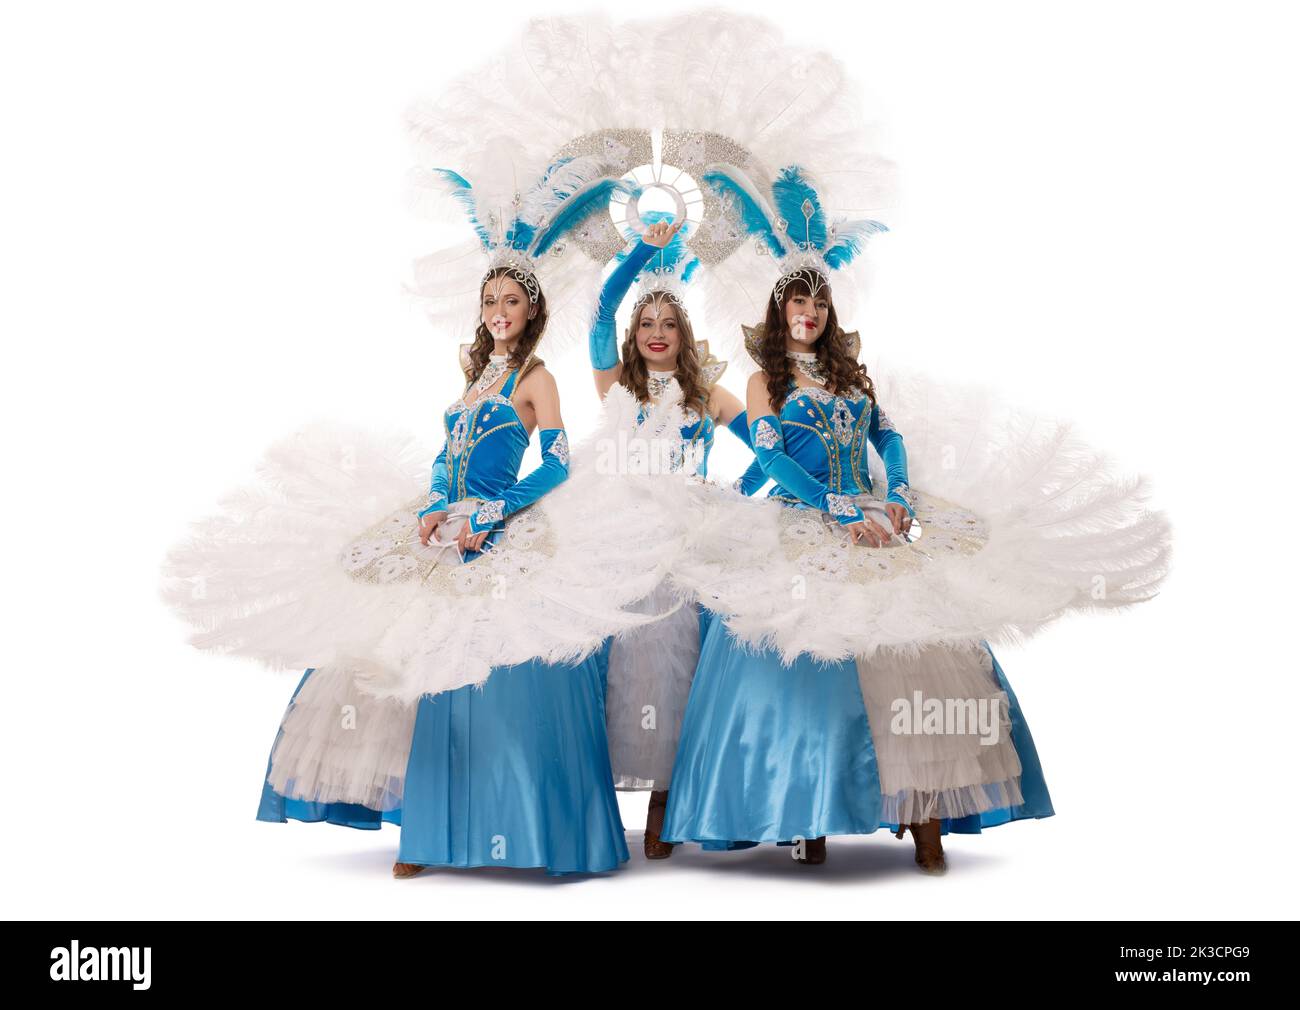 Woman in dance dresses with feather fans Stock Photo